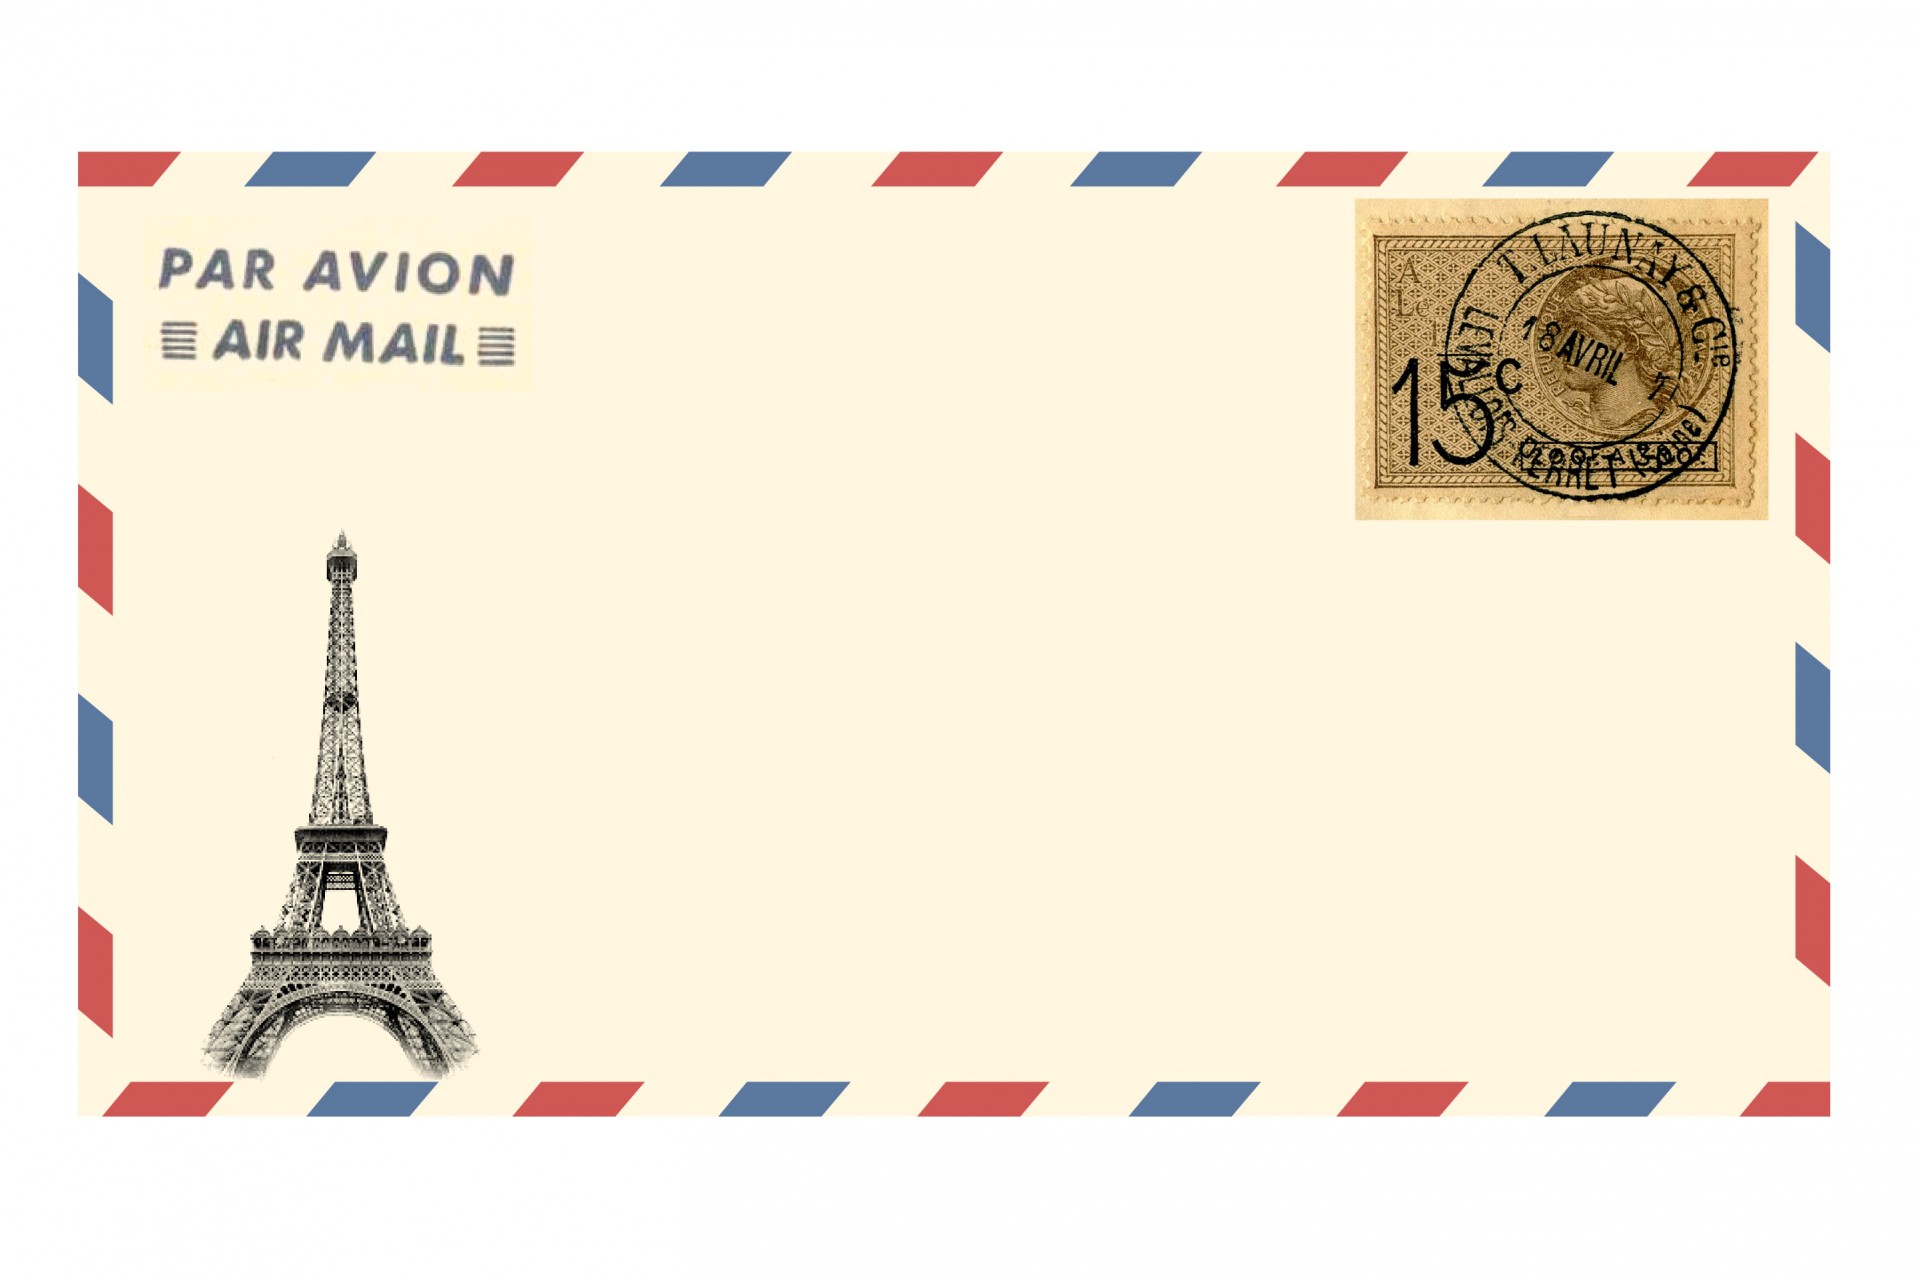 Vintage air mail envelope with eiffel tower and french postage